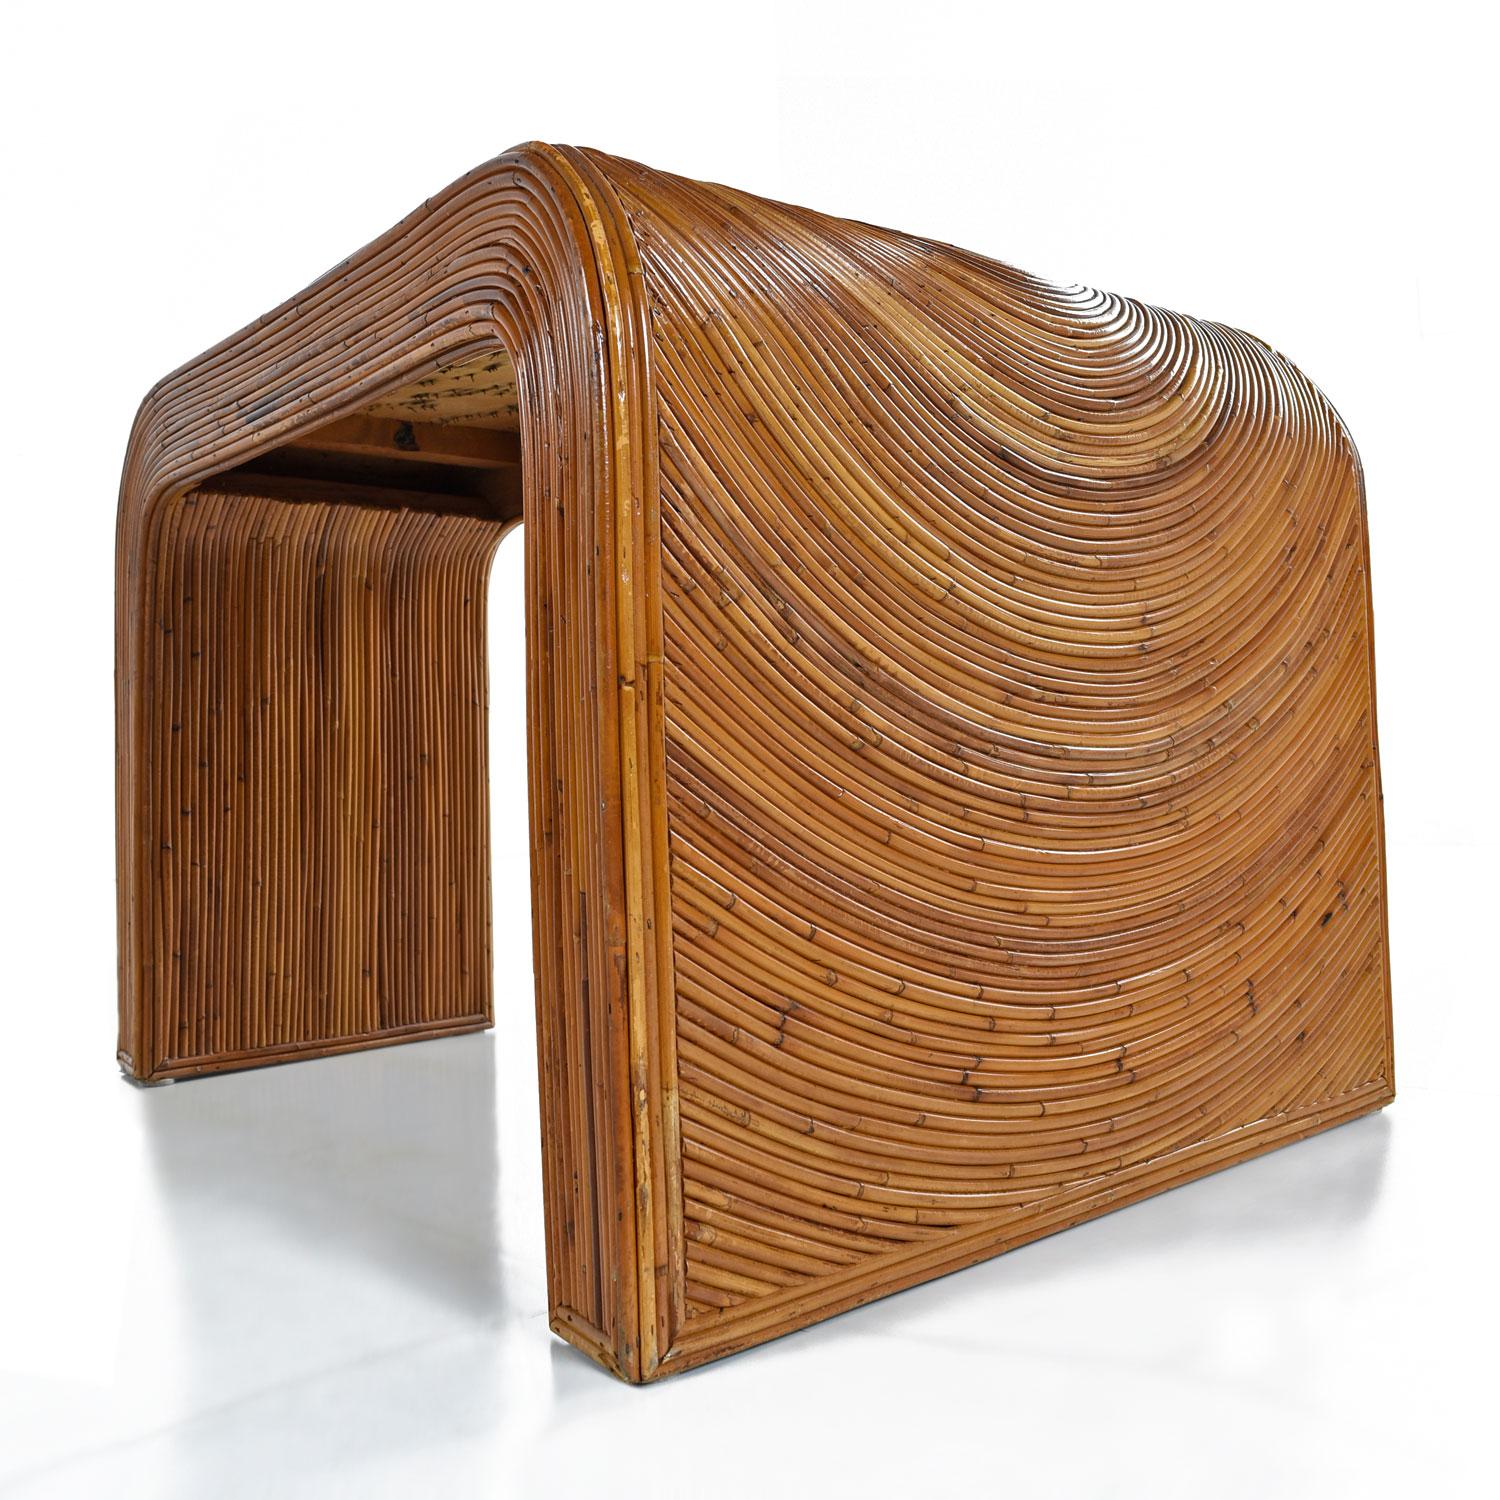 Easily place this wedge shaped Gabriella Crespi style side table between two arm chairs, a single chair, or between two sofas. The space saving design allows you to make the most of your home without sacrificing style. The earthy pencil reed motif